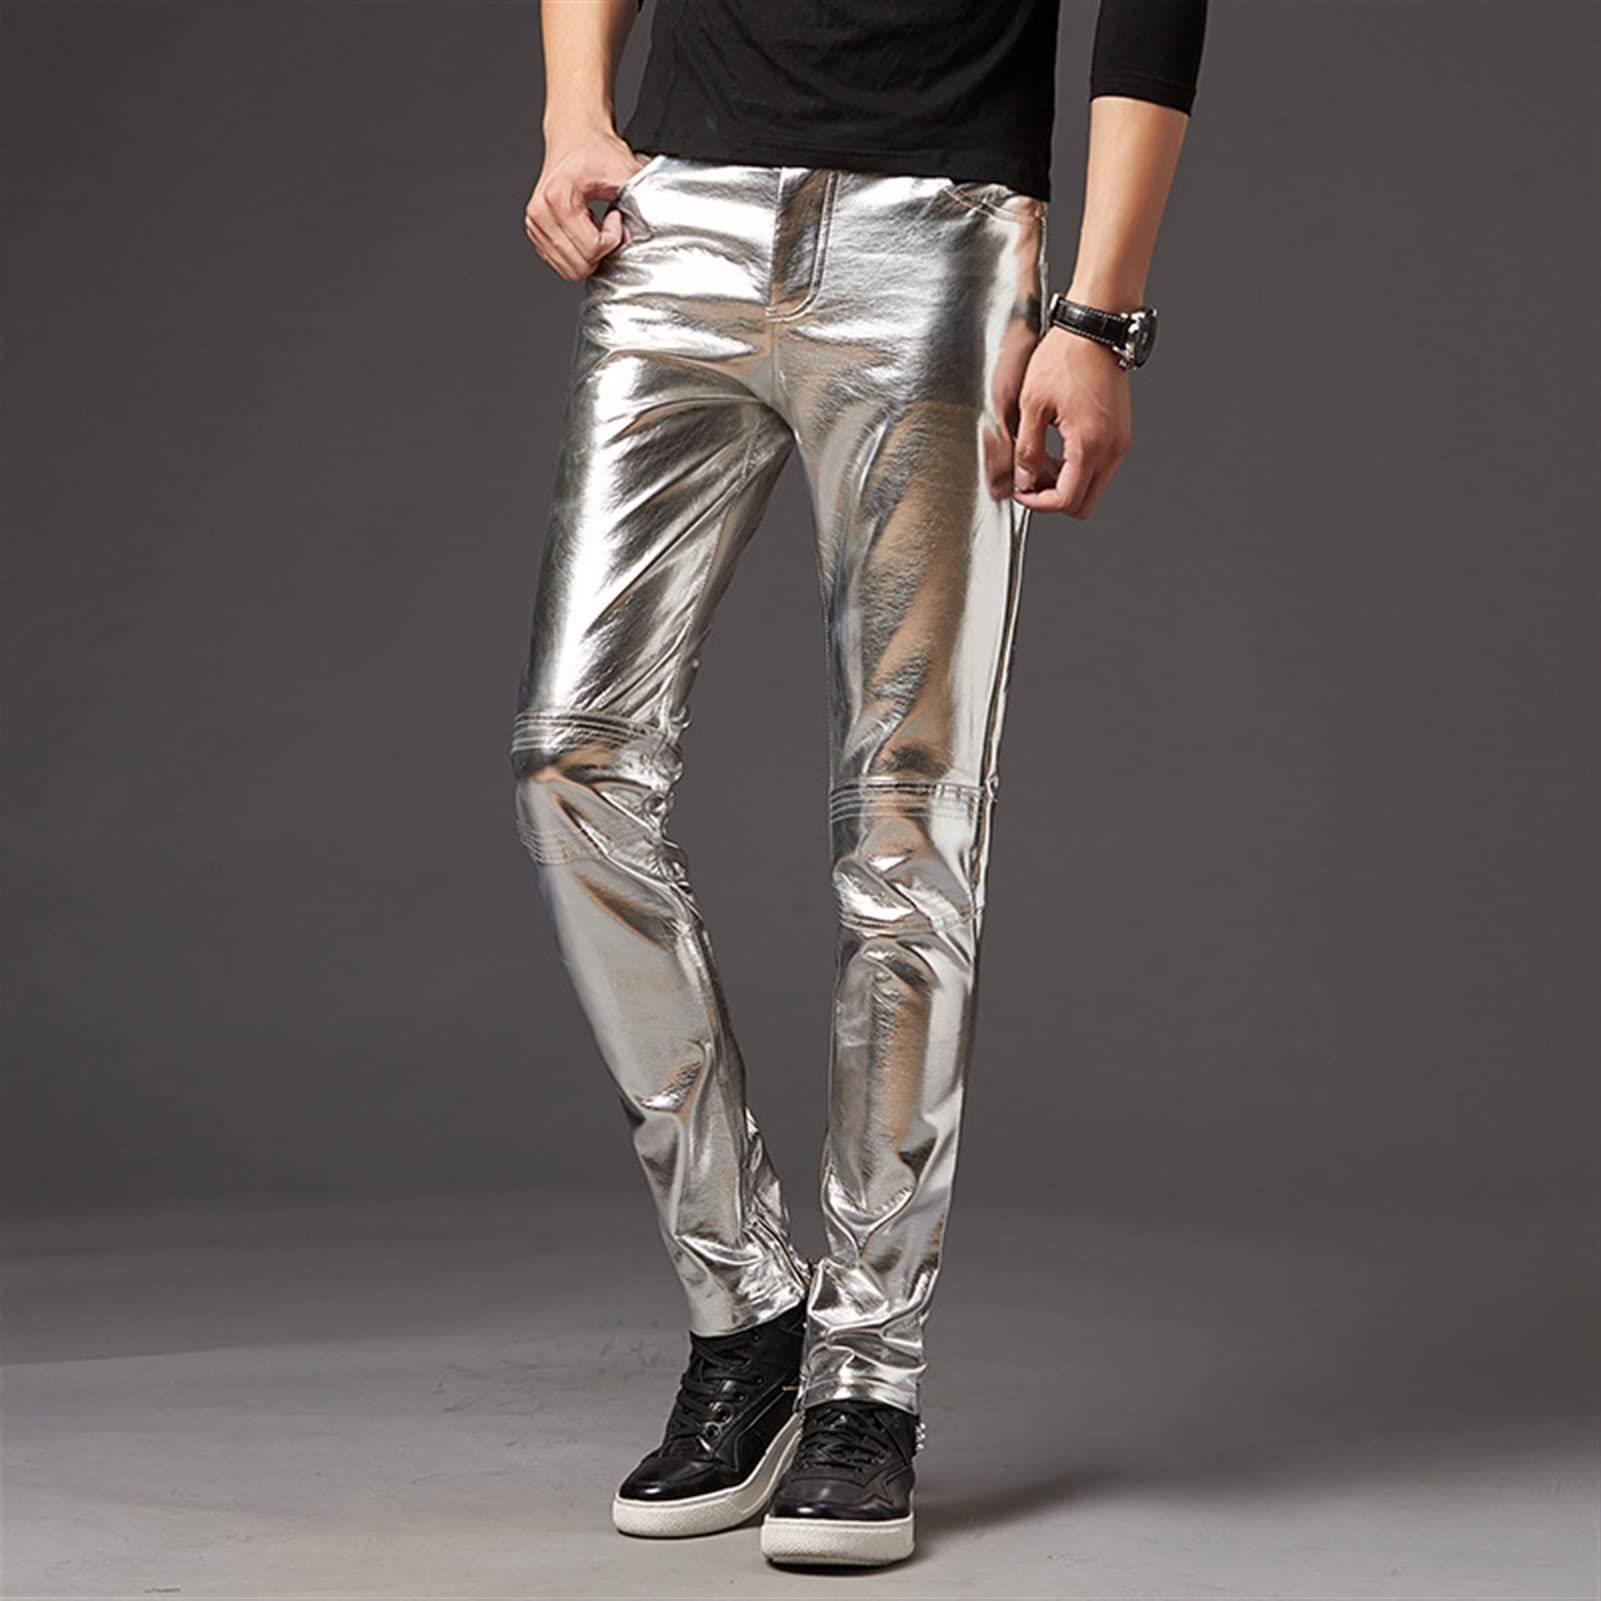 Uniquely Stylish: Men’s Leather Pants as a Thoughtful Gift插图